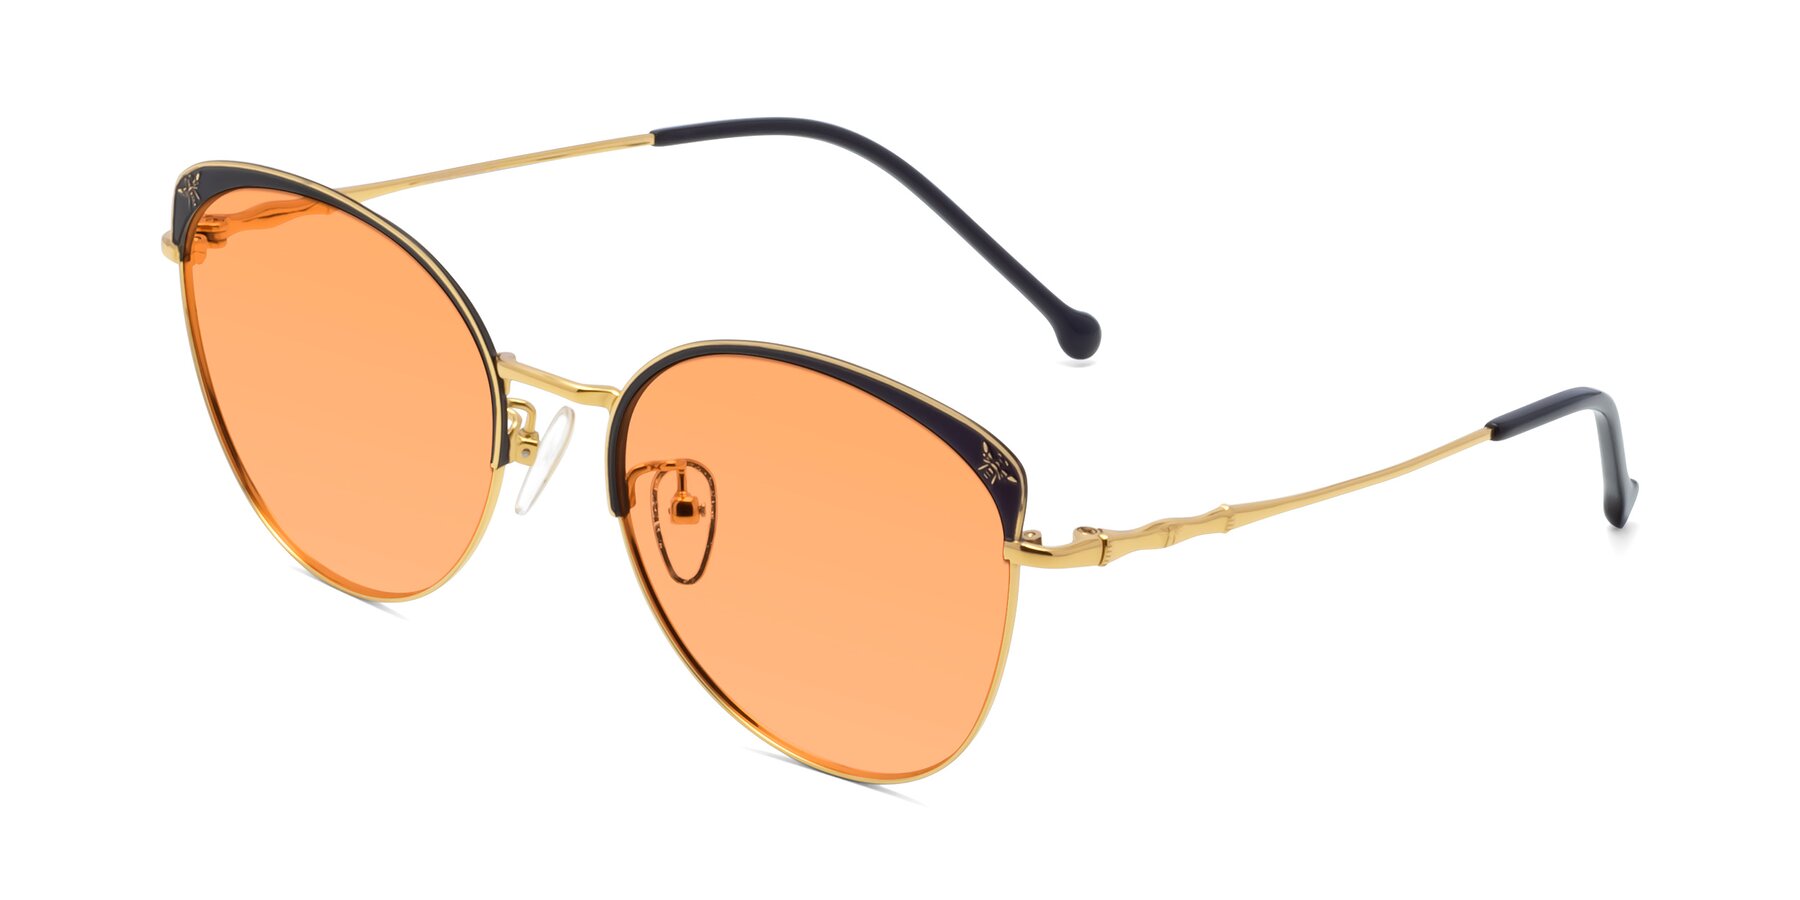 Angle of 18019 in Black-Gold with Medium Orange Tinted Lenses